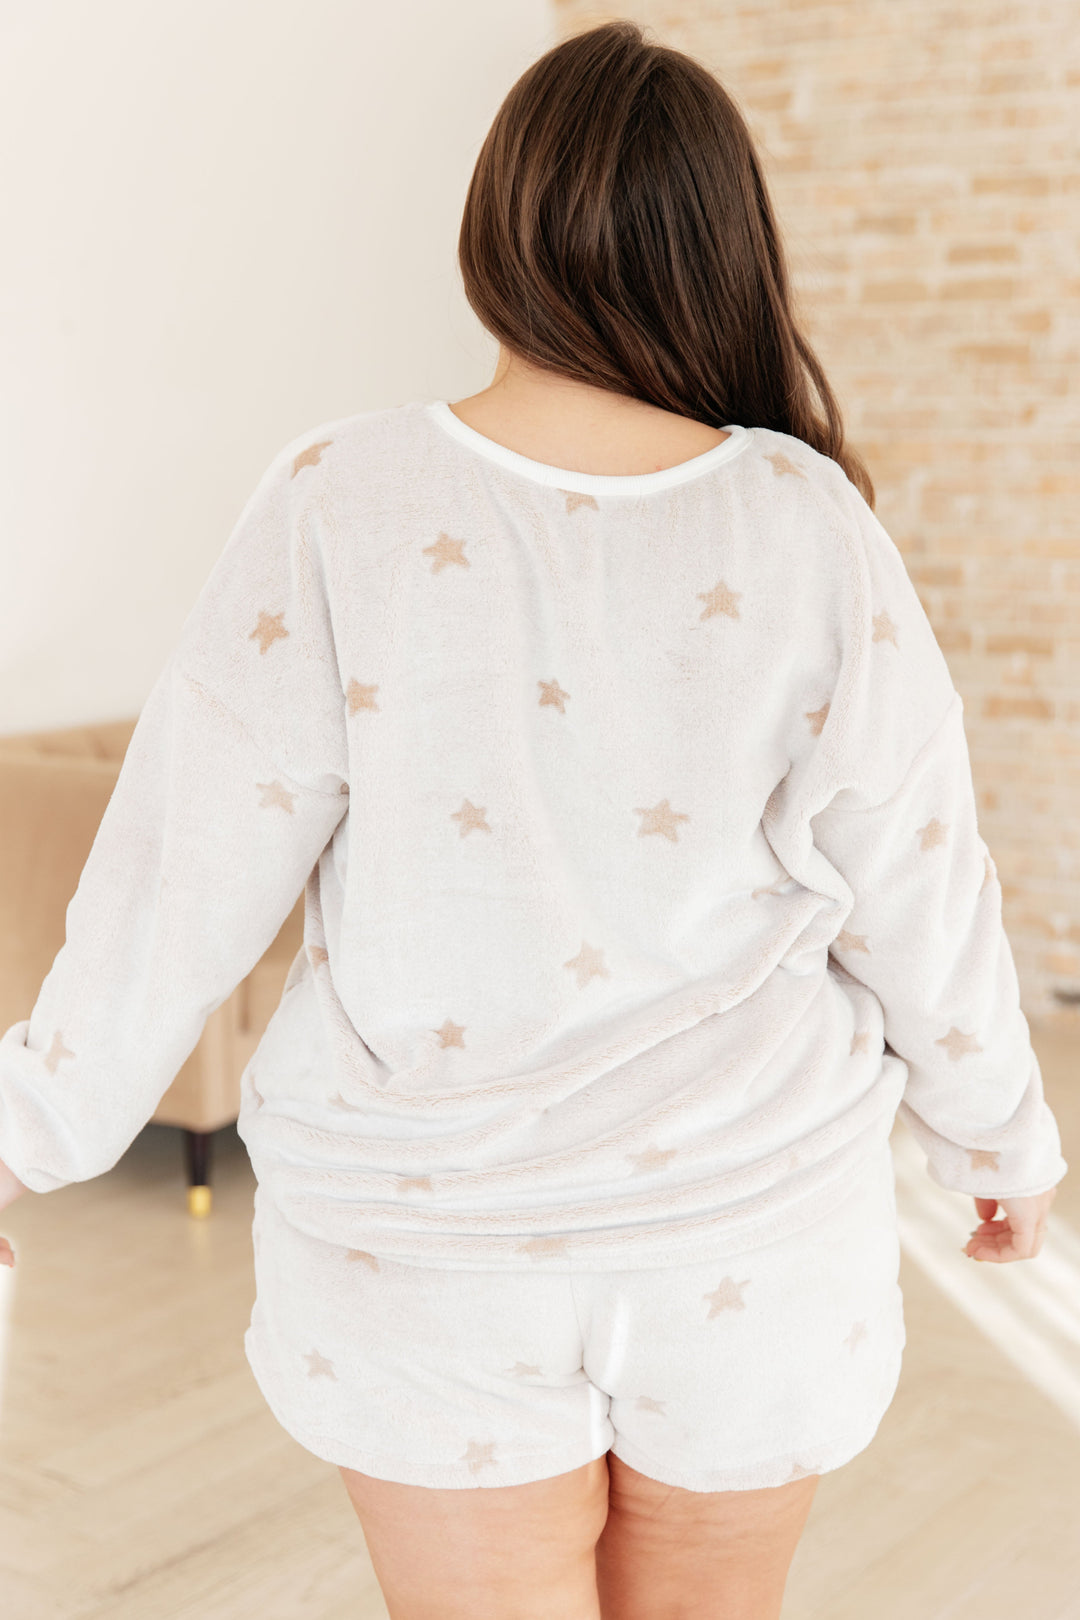 Stars at Night Loungewear Set-Short Sleeve Tops-Inspired by Justeen-Women's Clothing Boutique in Chicago, Illinois